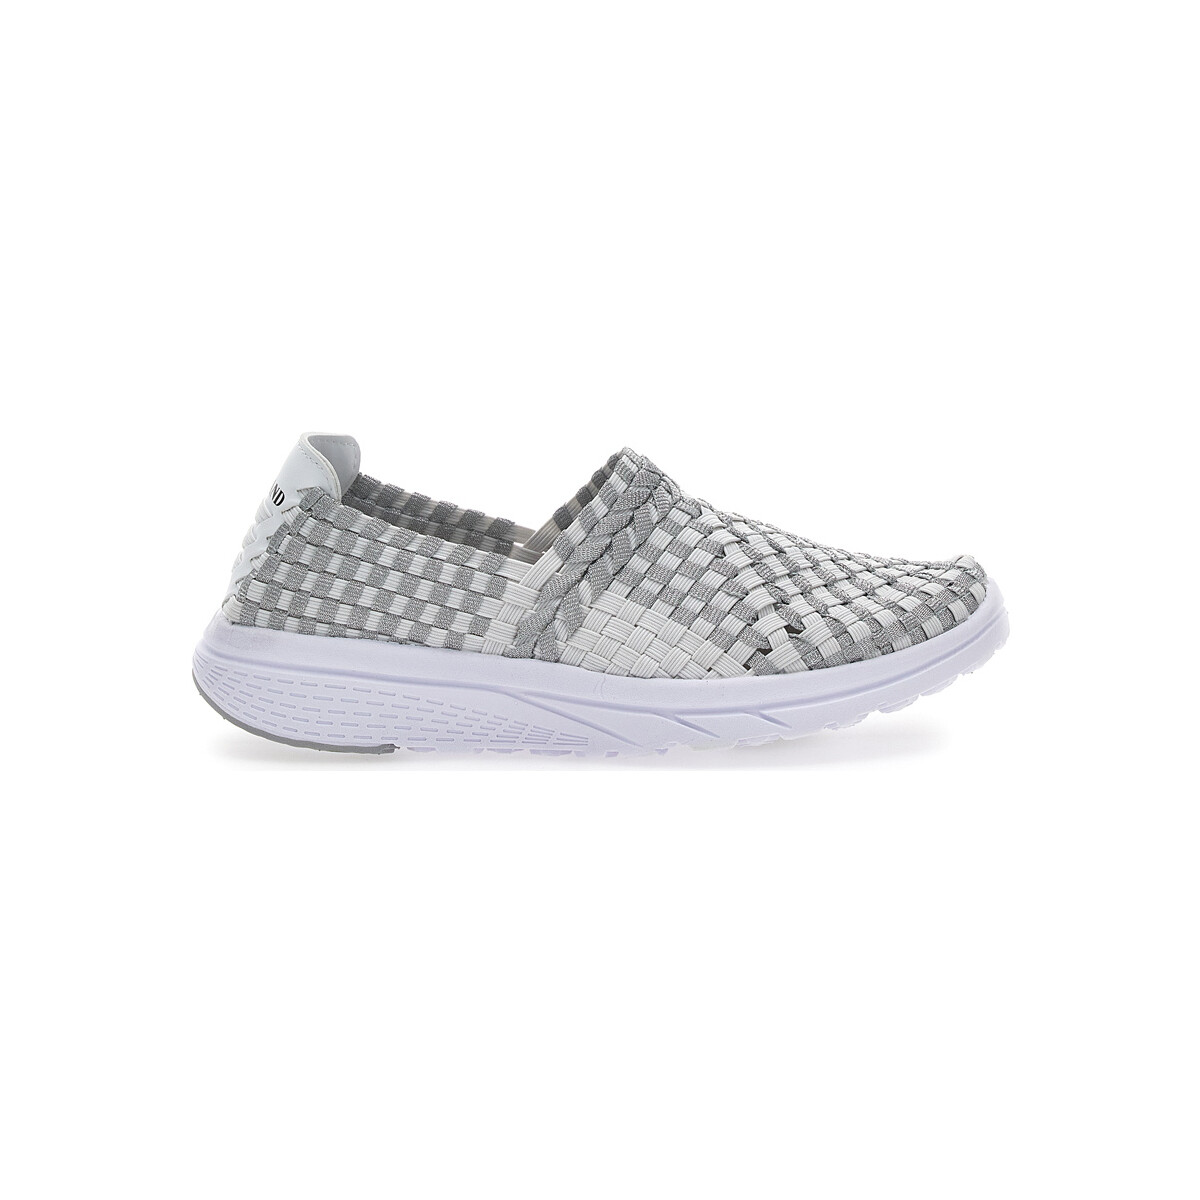 Scarpe Donna Sneakers Overland 640 Argento